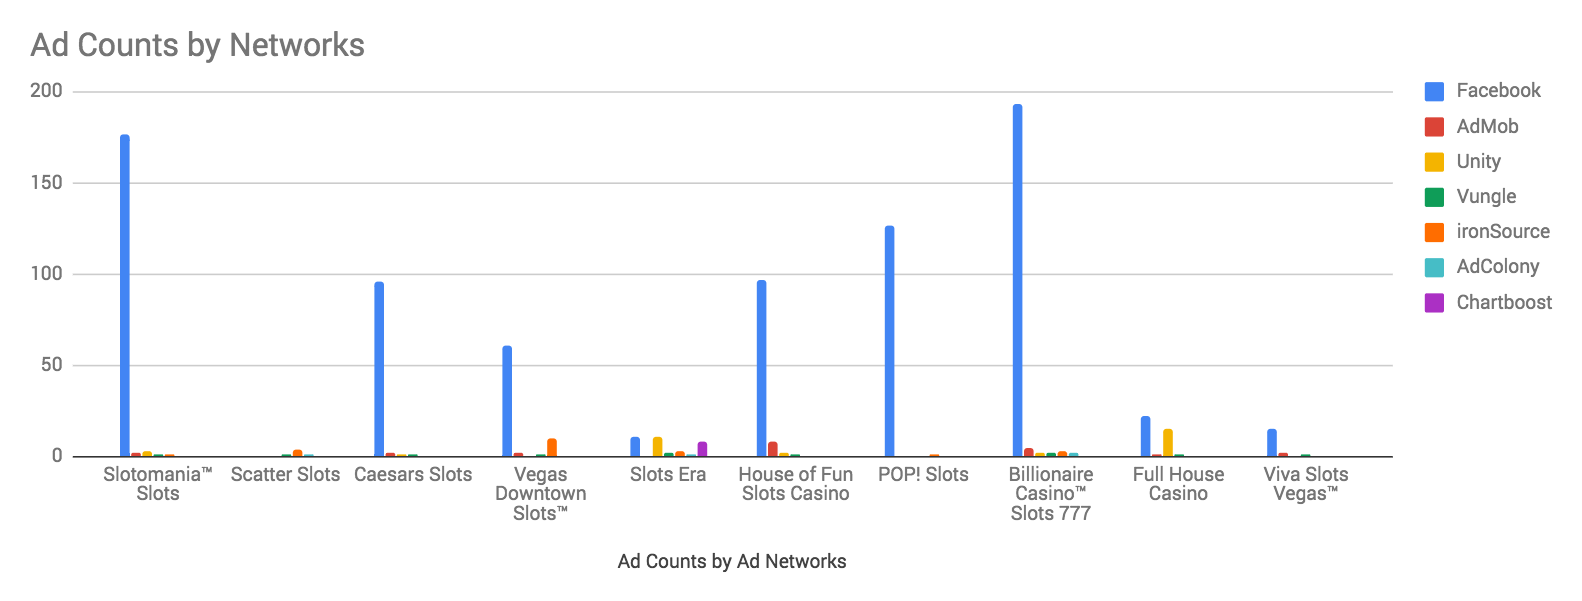 Ad Counts by in-app ad networks